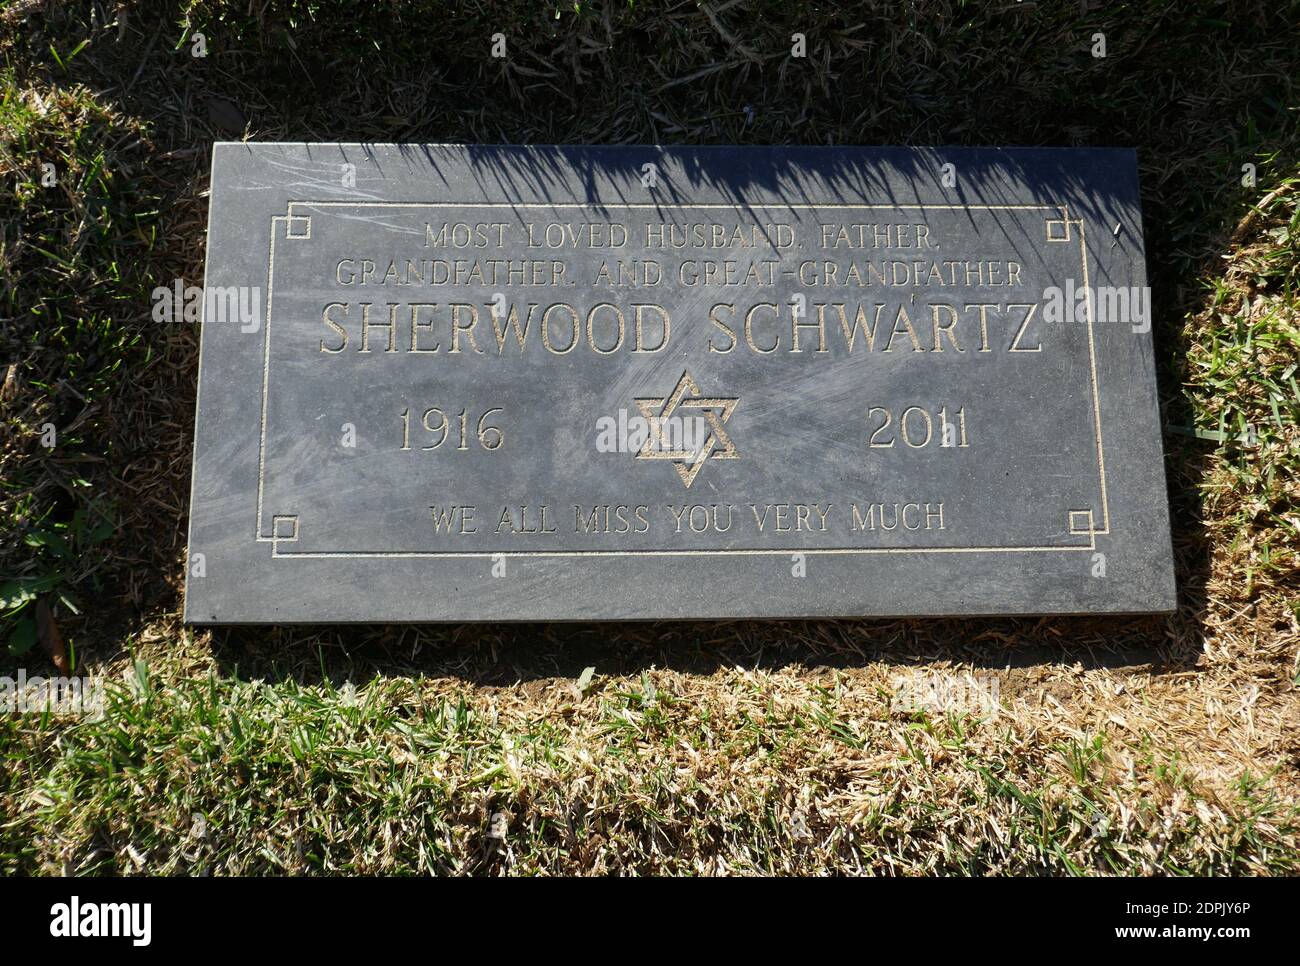 Culver City, California, USA 18th December 2020 A general view of atmosphere of producer Sherwood Schwartz's Grave in Valley of Remembrance section at Hillside Memorial Park on December 18, 2020 in Culver City, California, USA. Photo by Barry King/Alamy Stock Photo Stock Photo